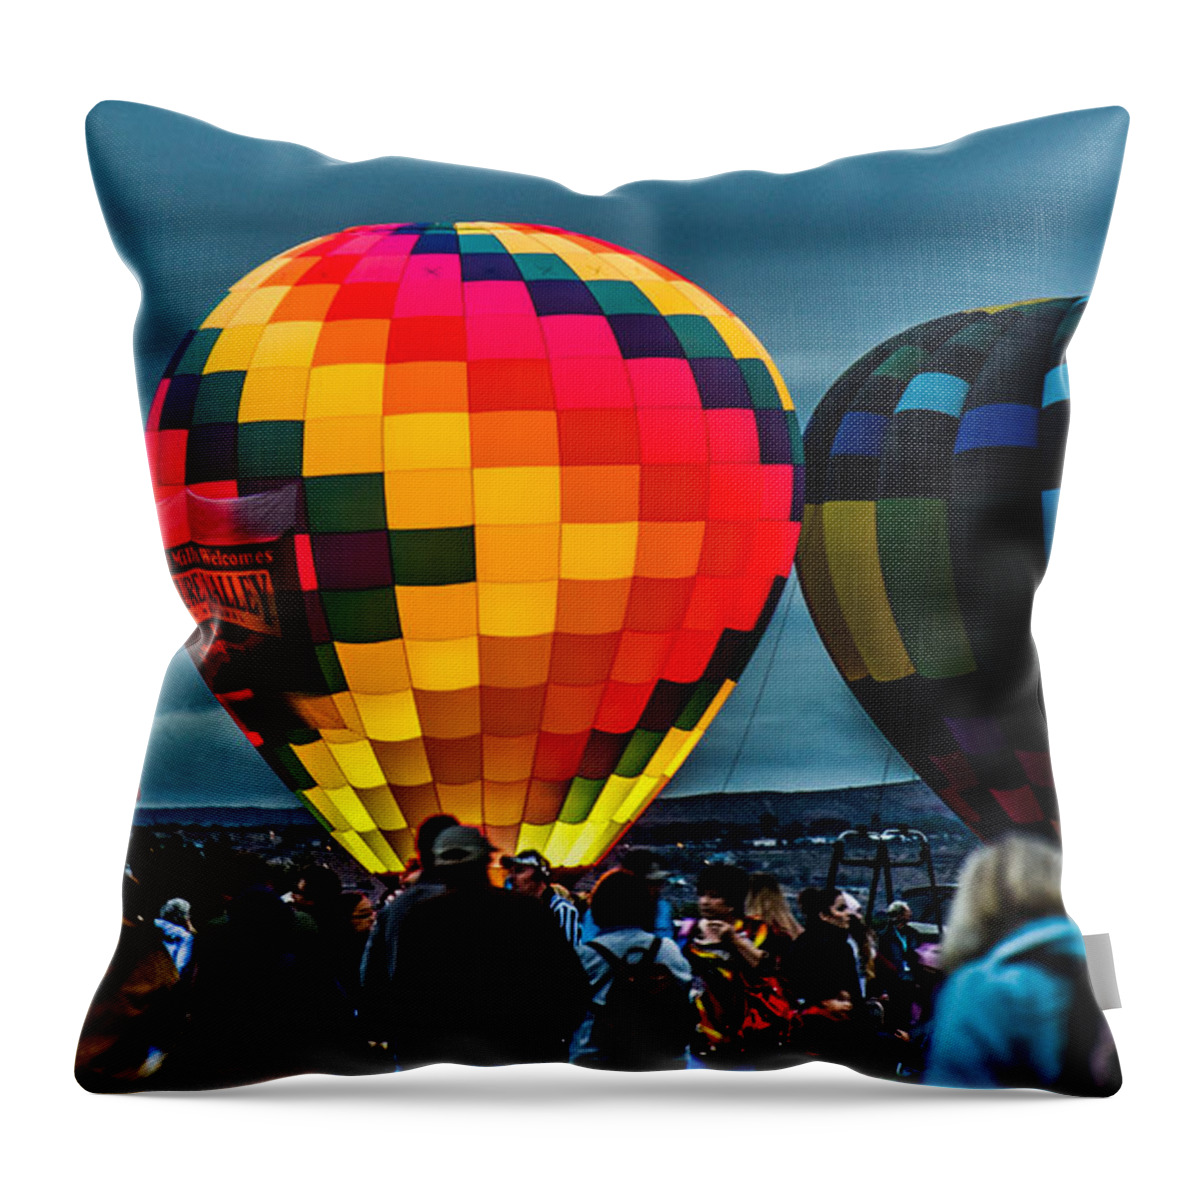 Morning Inflation Throw Pillow featuring the photograph Morning Inflation by Grace Grogan